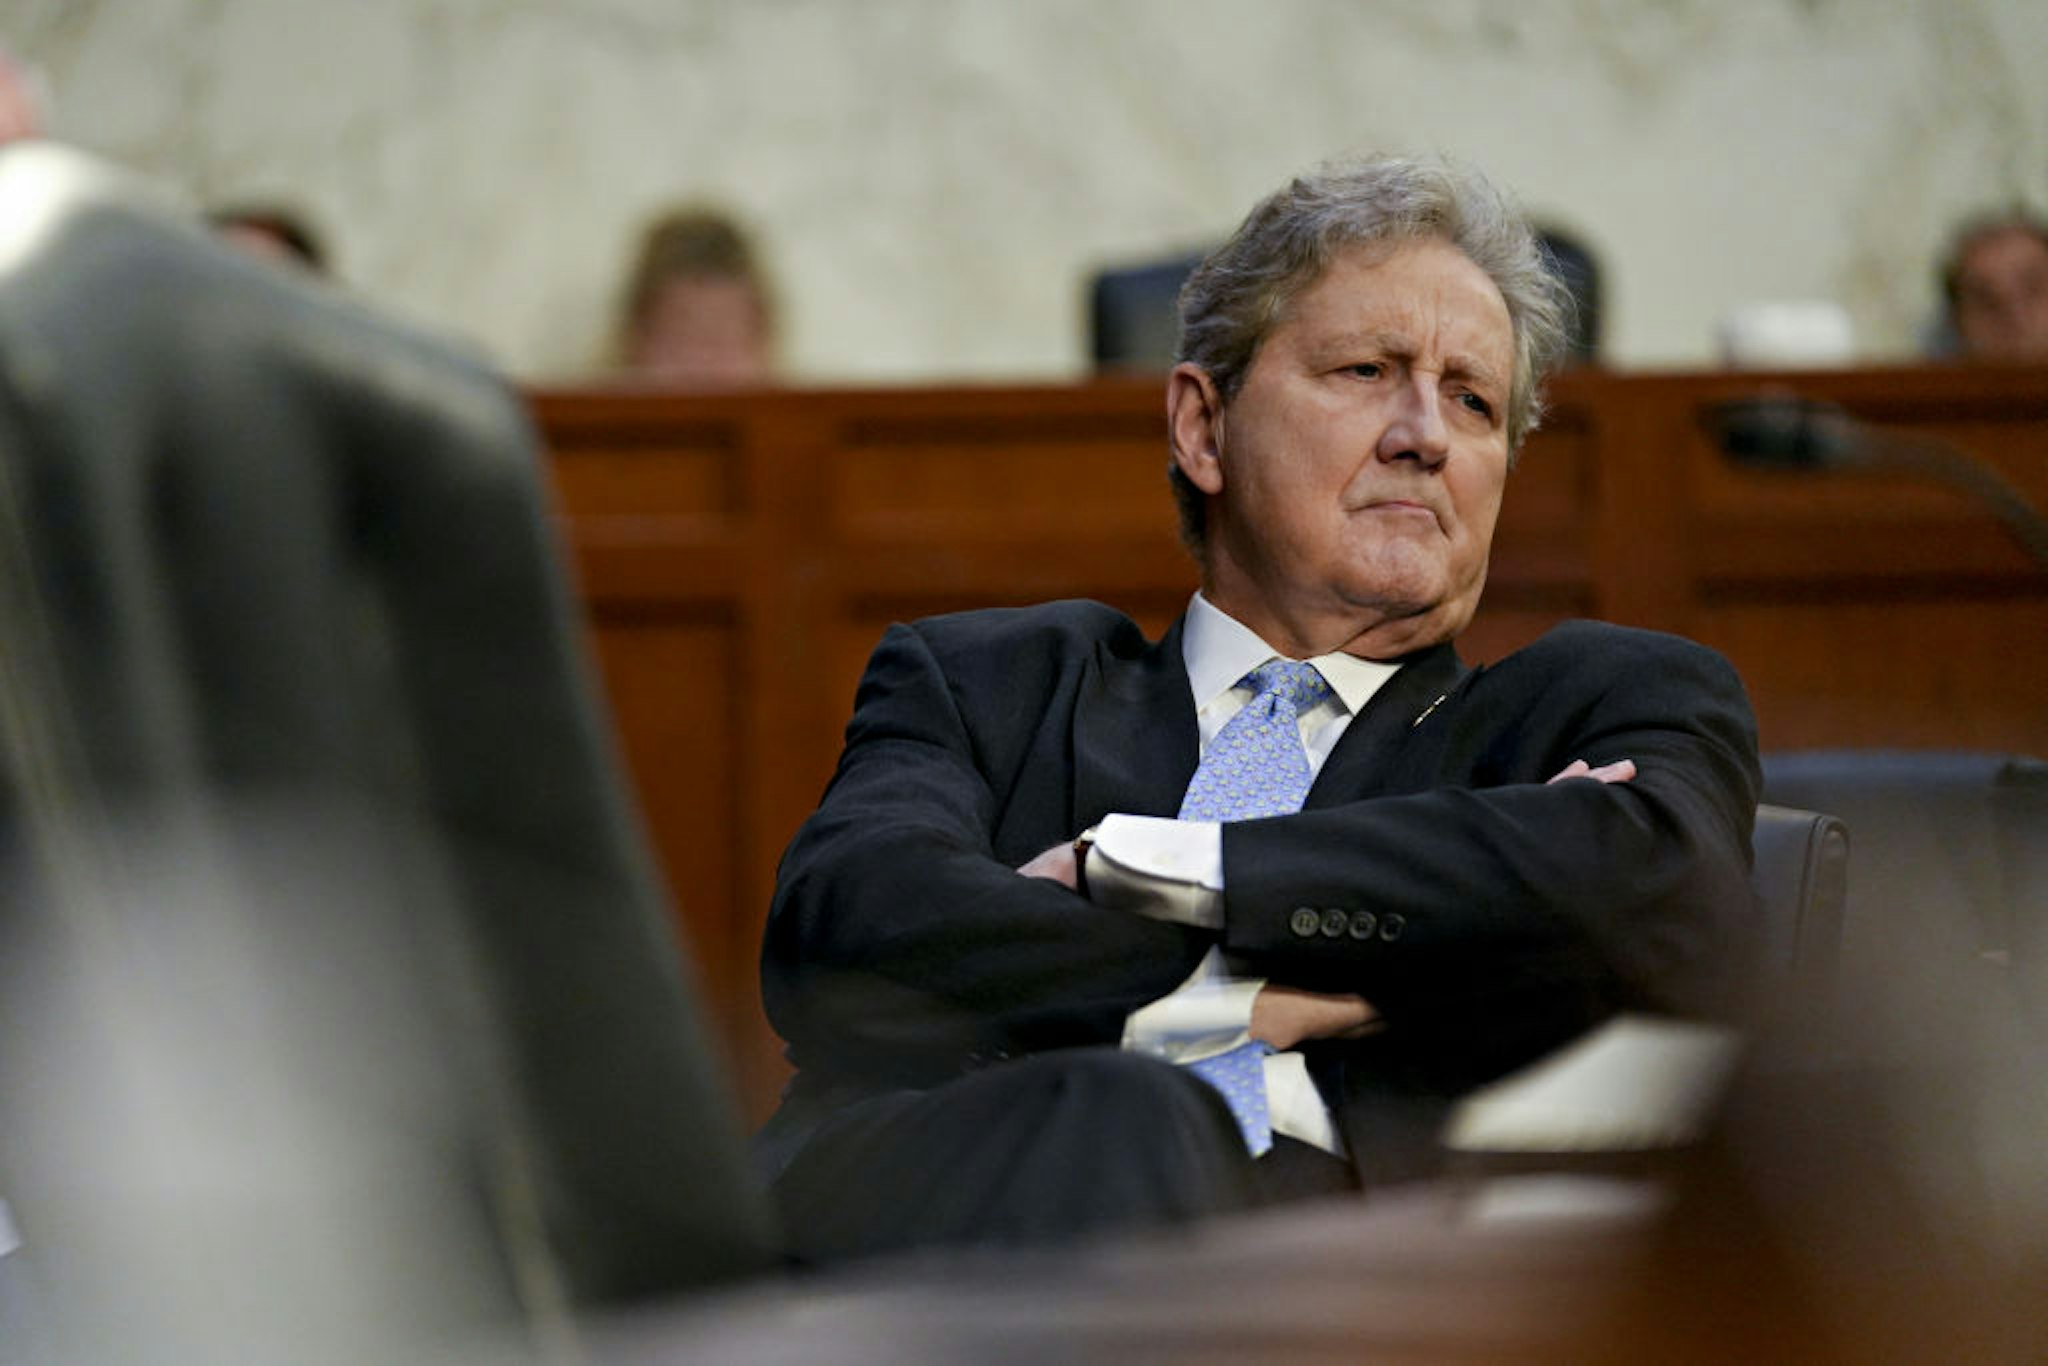 Senator John Kennedy, a Republican from Louisiana, during a Senate Judiciary Committee hearing with Twitter whistleblower Peiter Zatko in Washington, D.C., US, on Tuesday, Sept. 13, 2022. Zatko's first public appearance since his explosive allegations against the social media giant comes as lawmakers and regulators seek to rein in or break up tech companies. Photographer: Eric Lee/Bloomberg via Getty Images